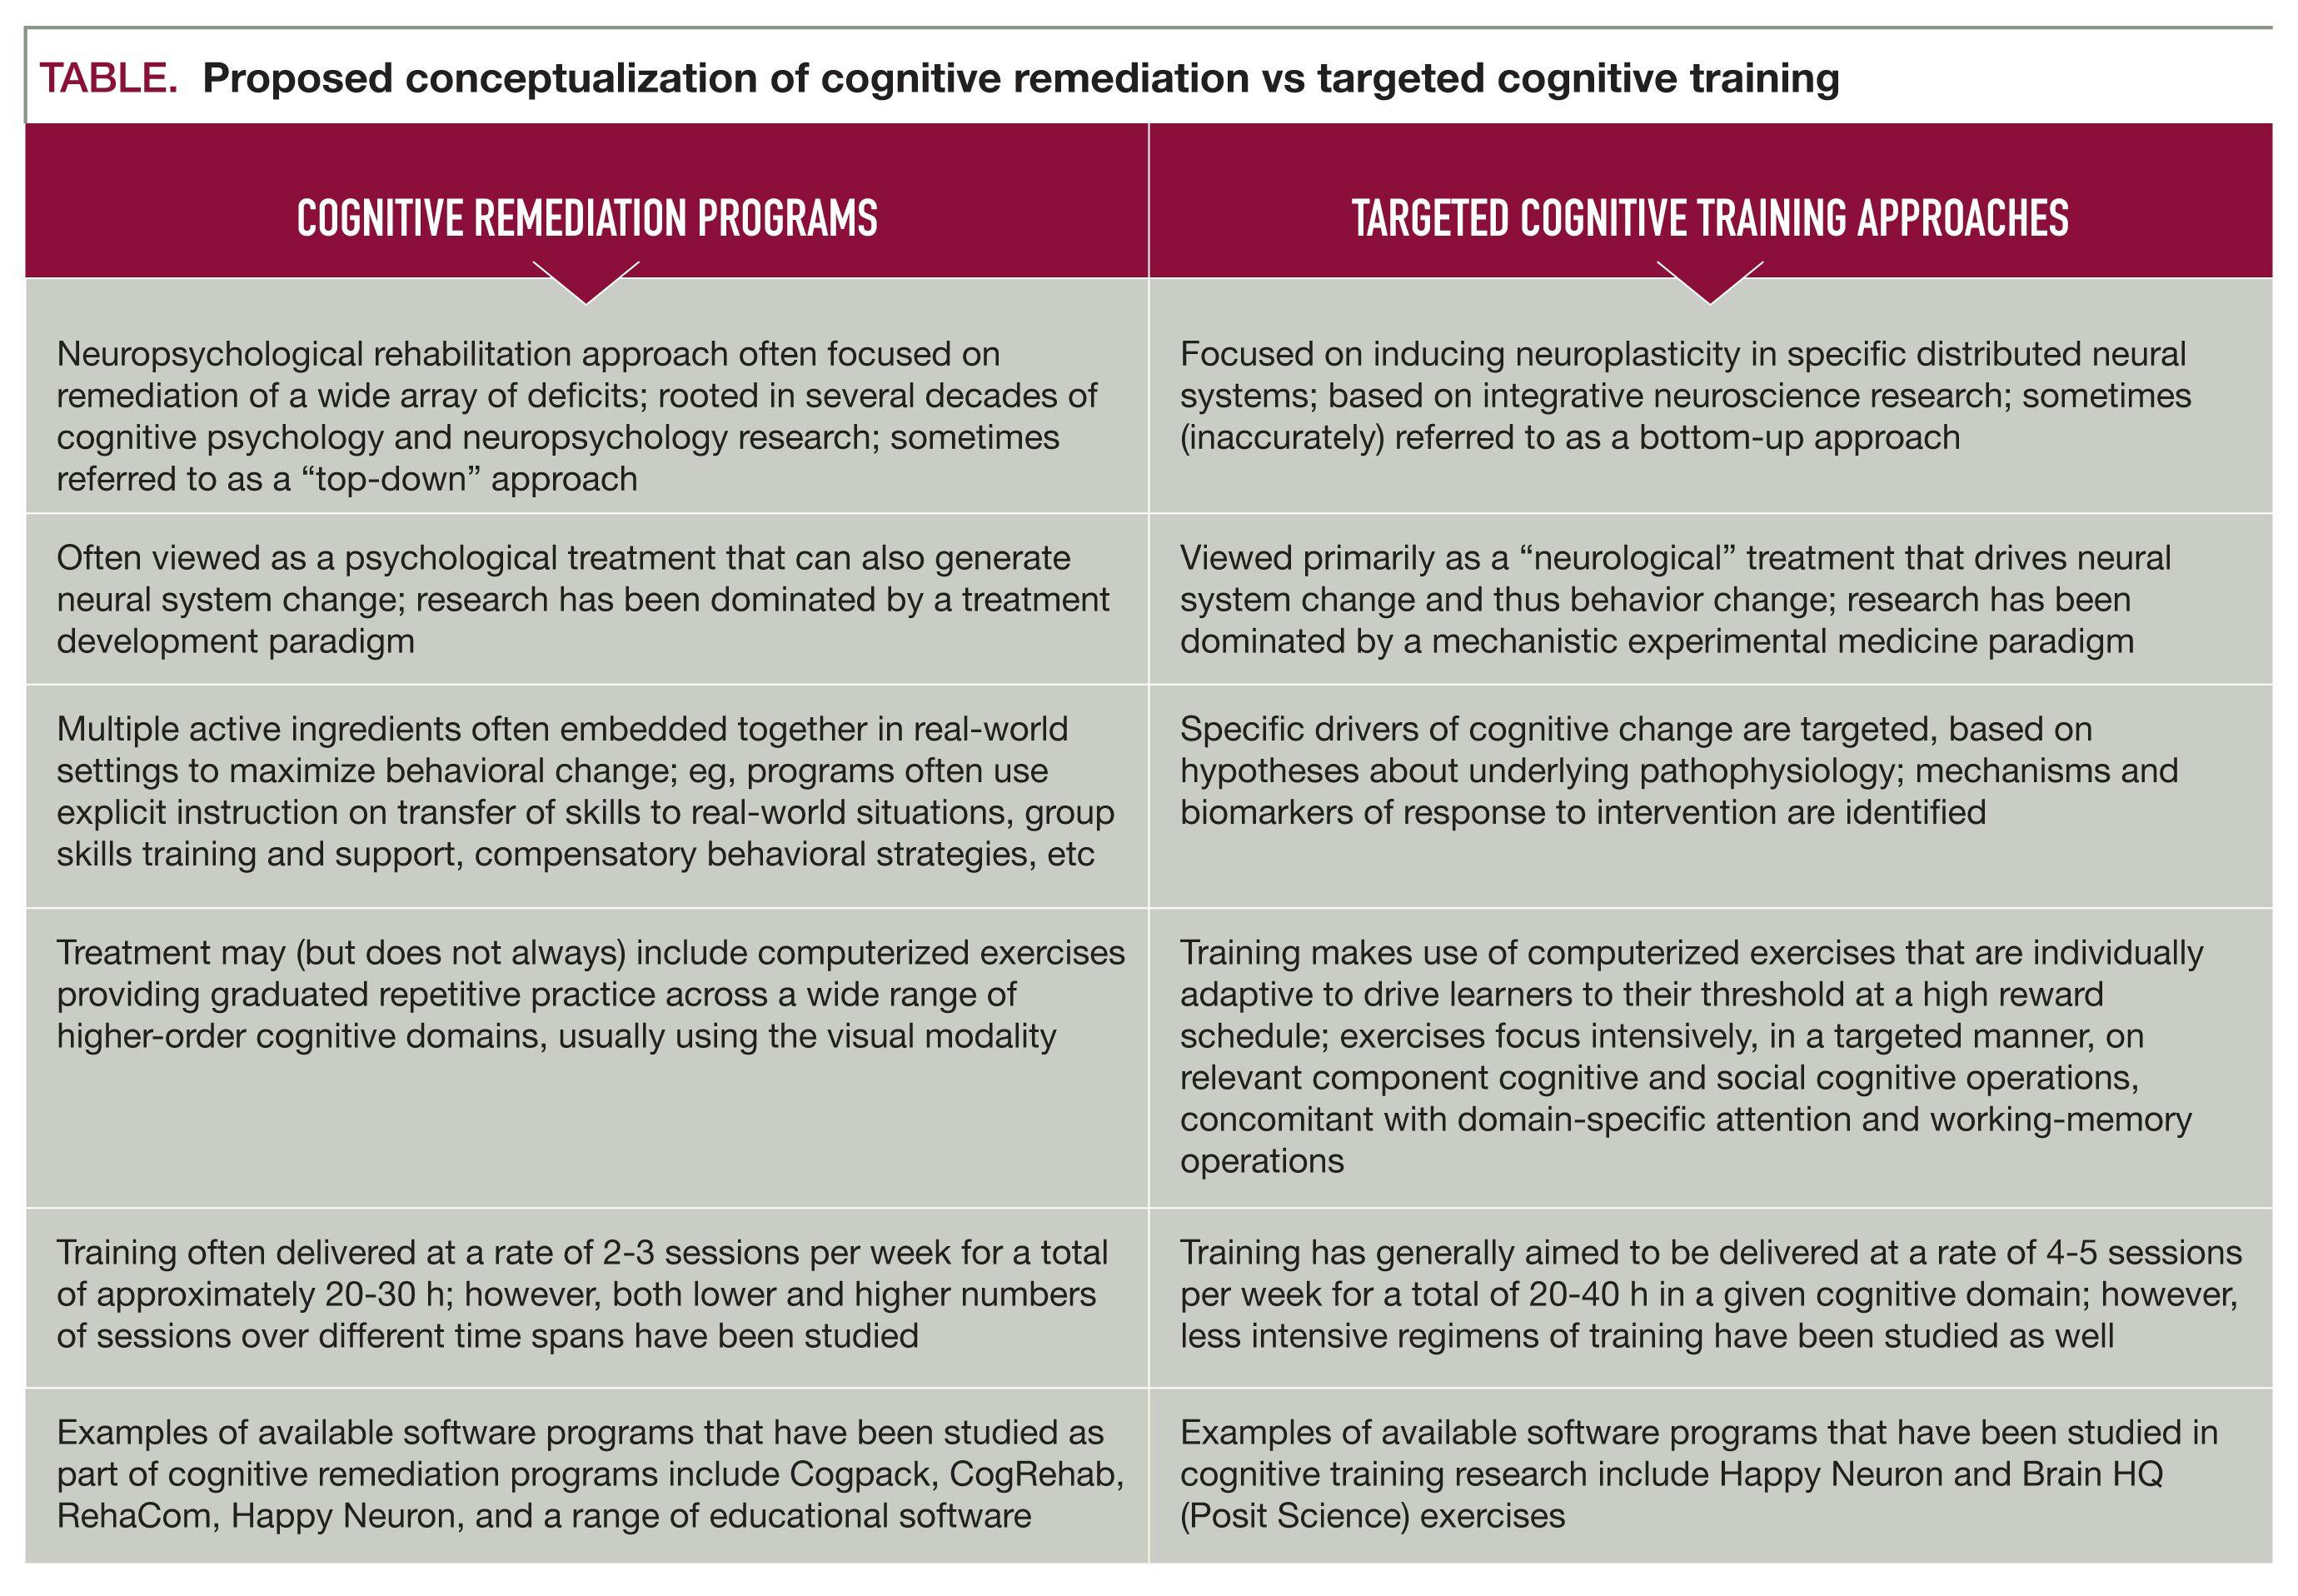 Proposed conceptualization of cognitive remediation vs targeted cognitive training